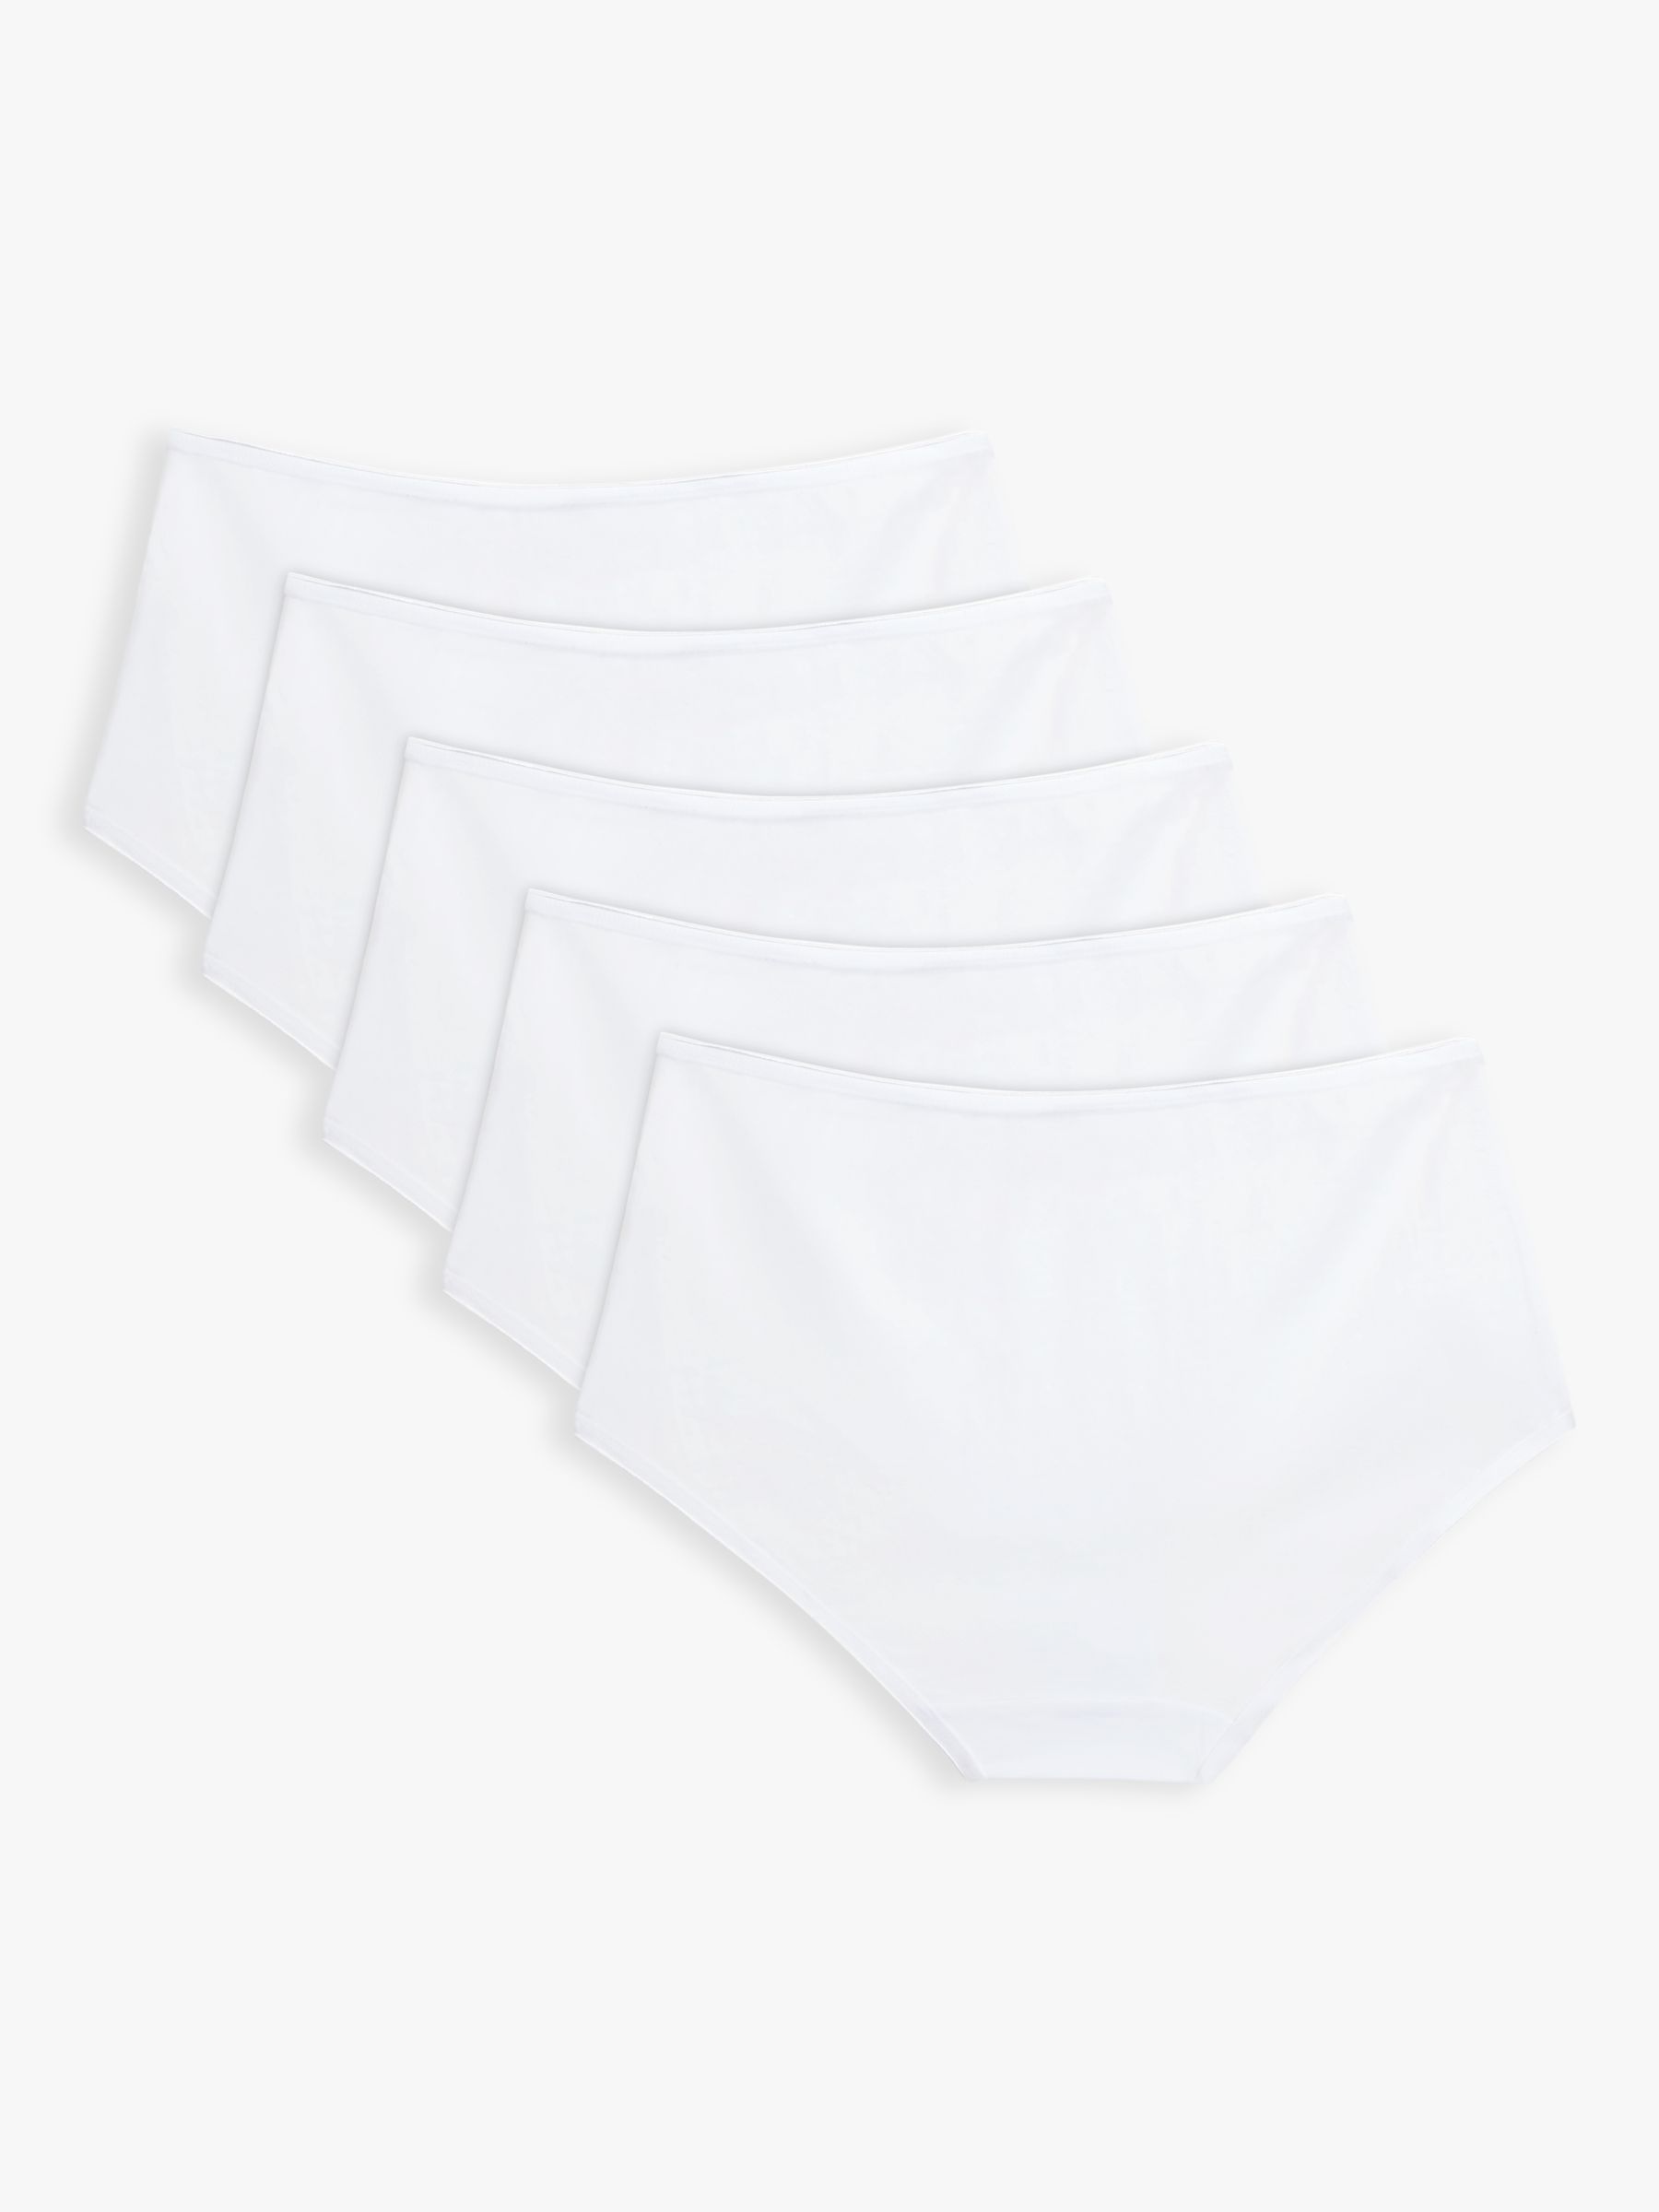 Buy John Lewis ANYDAY Cotton Full Briefs, Pack of 5 Online at johnlewis.com